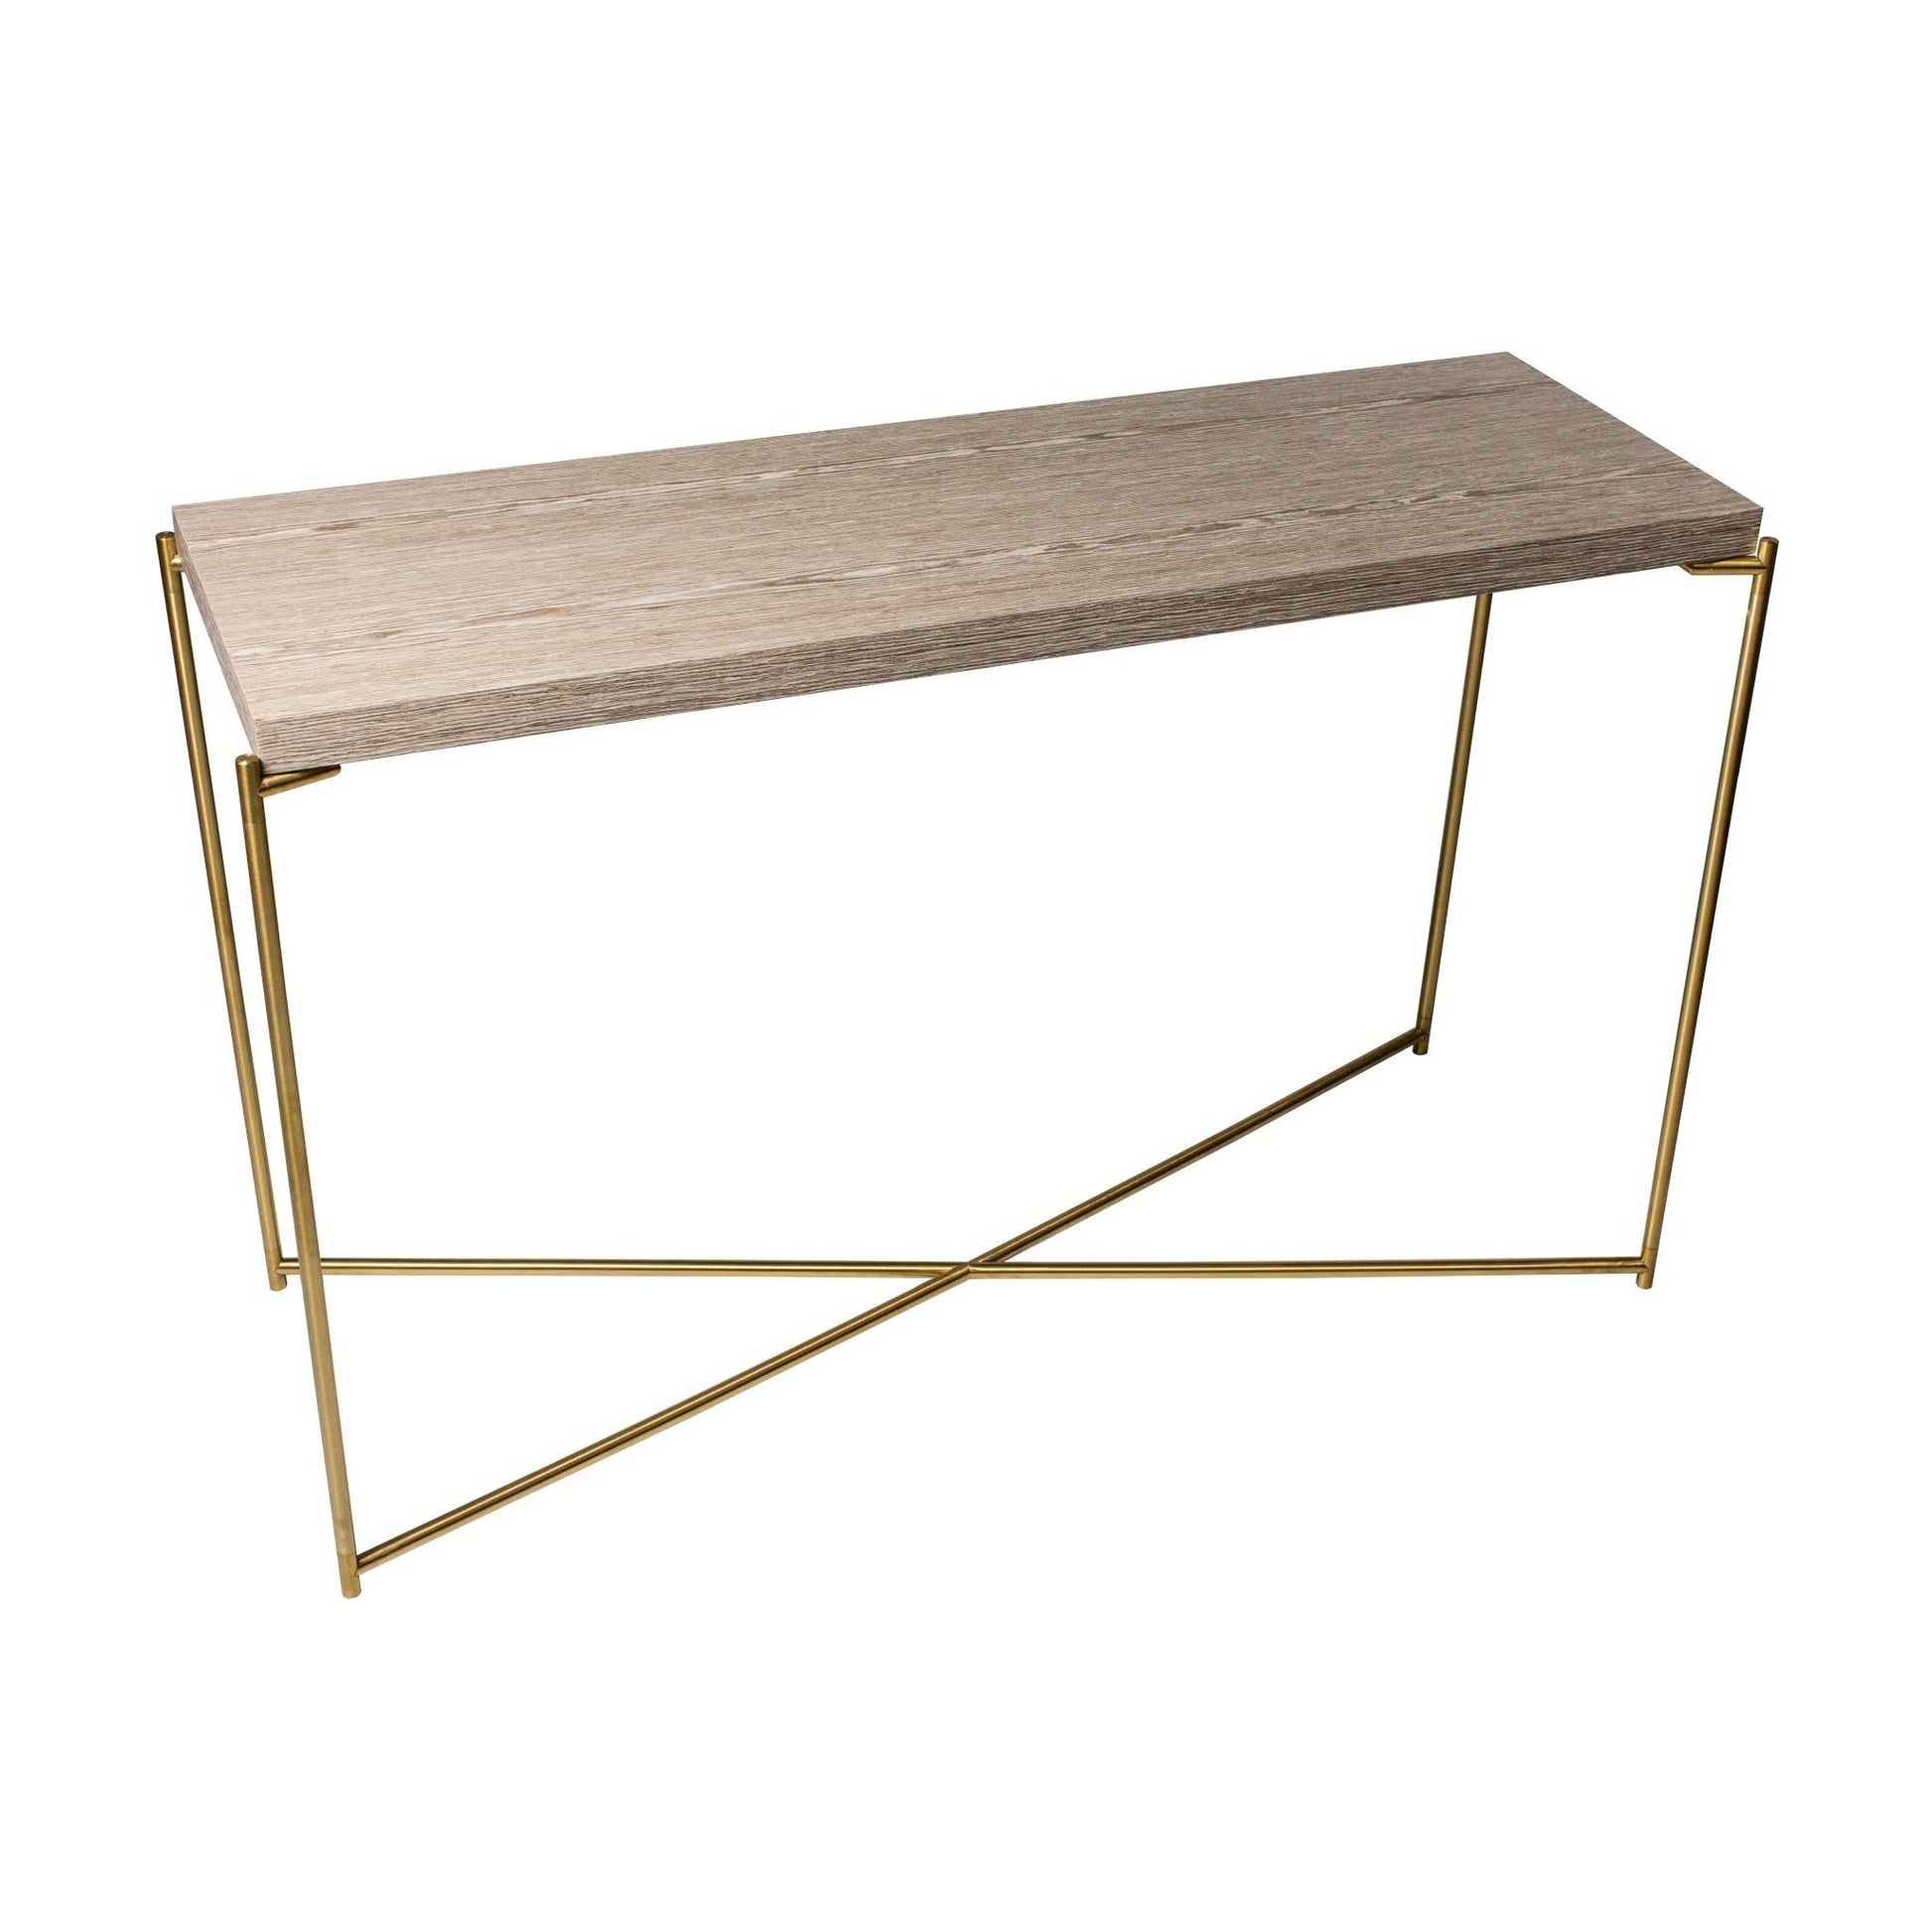 Iris Large Console Table - Weathered Oak & Brass Frame